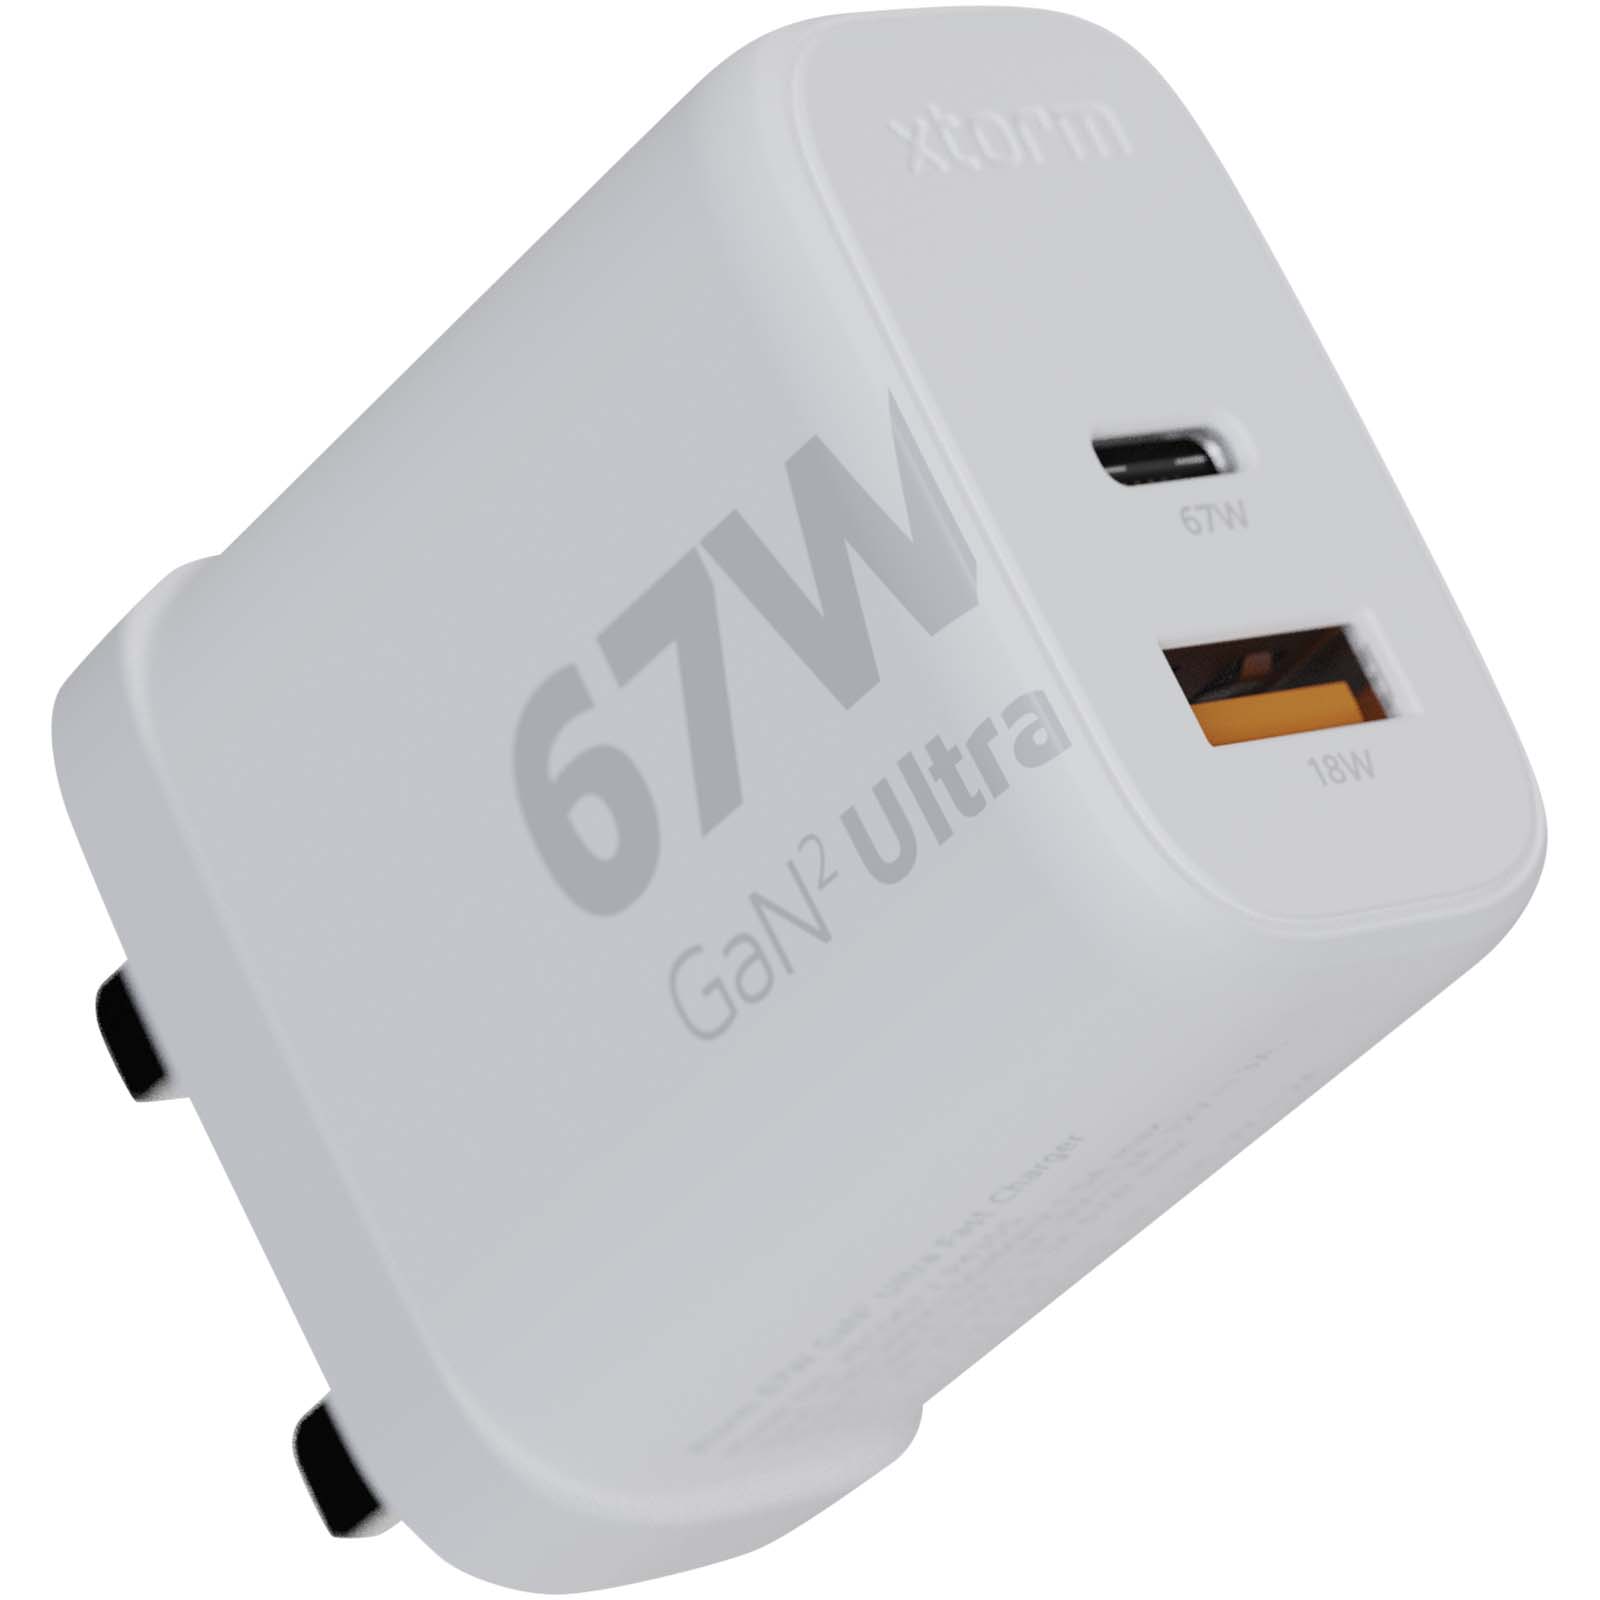 Advertising Chargers - Xtorm XEC067G GaN² Ultra 67W wall charger - UK plug - 0